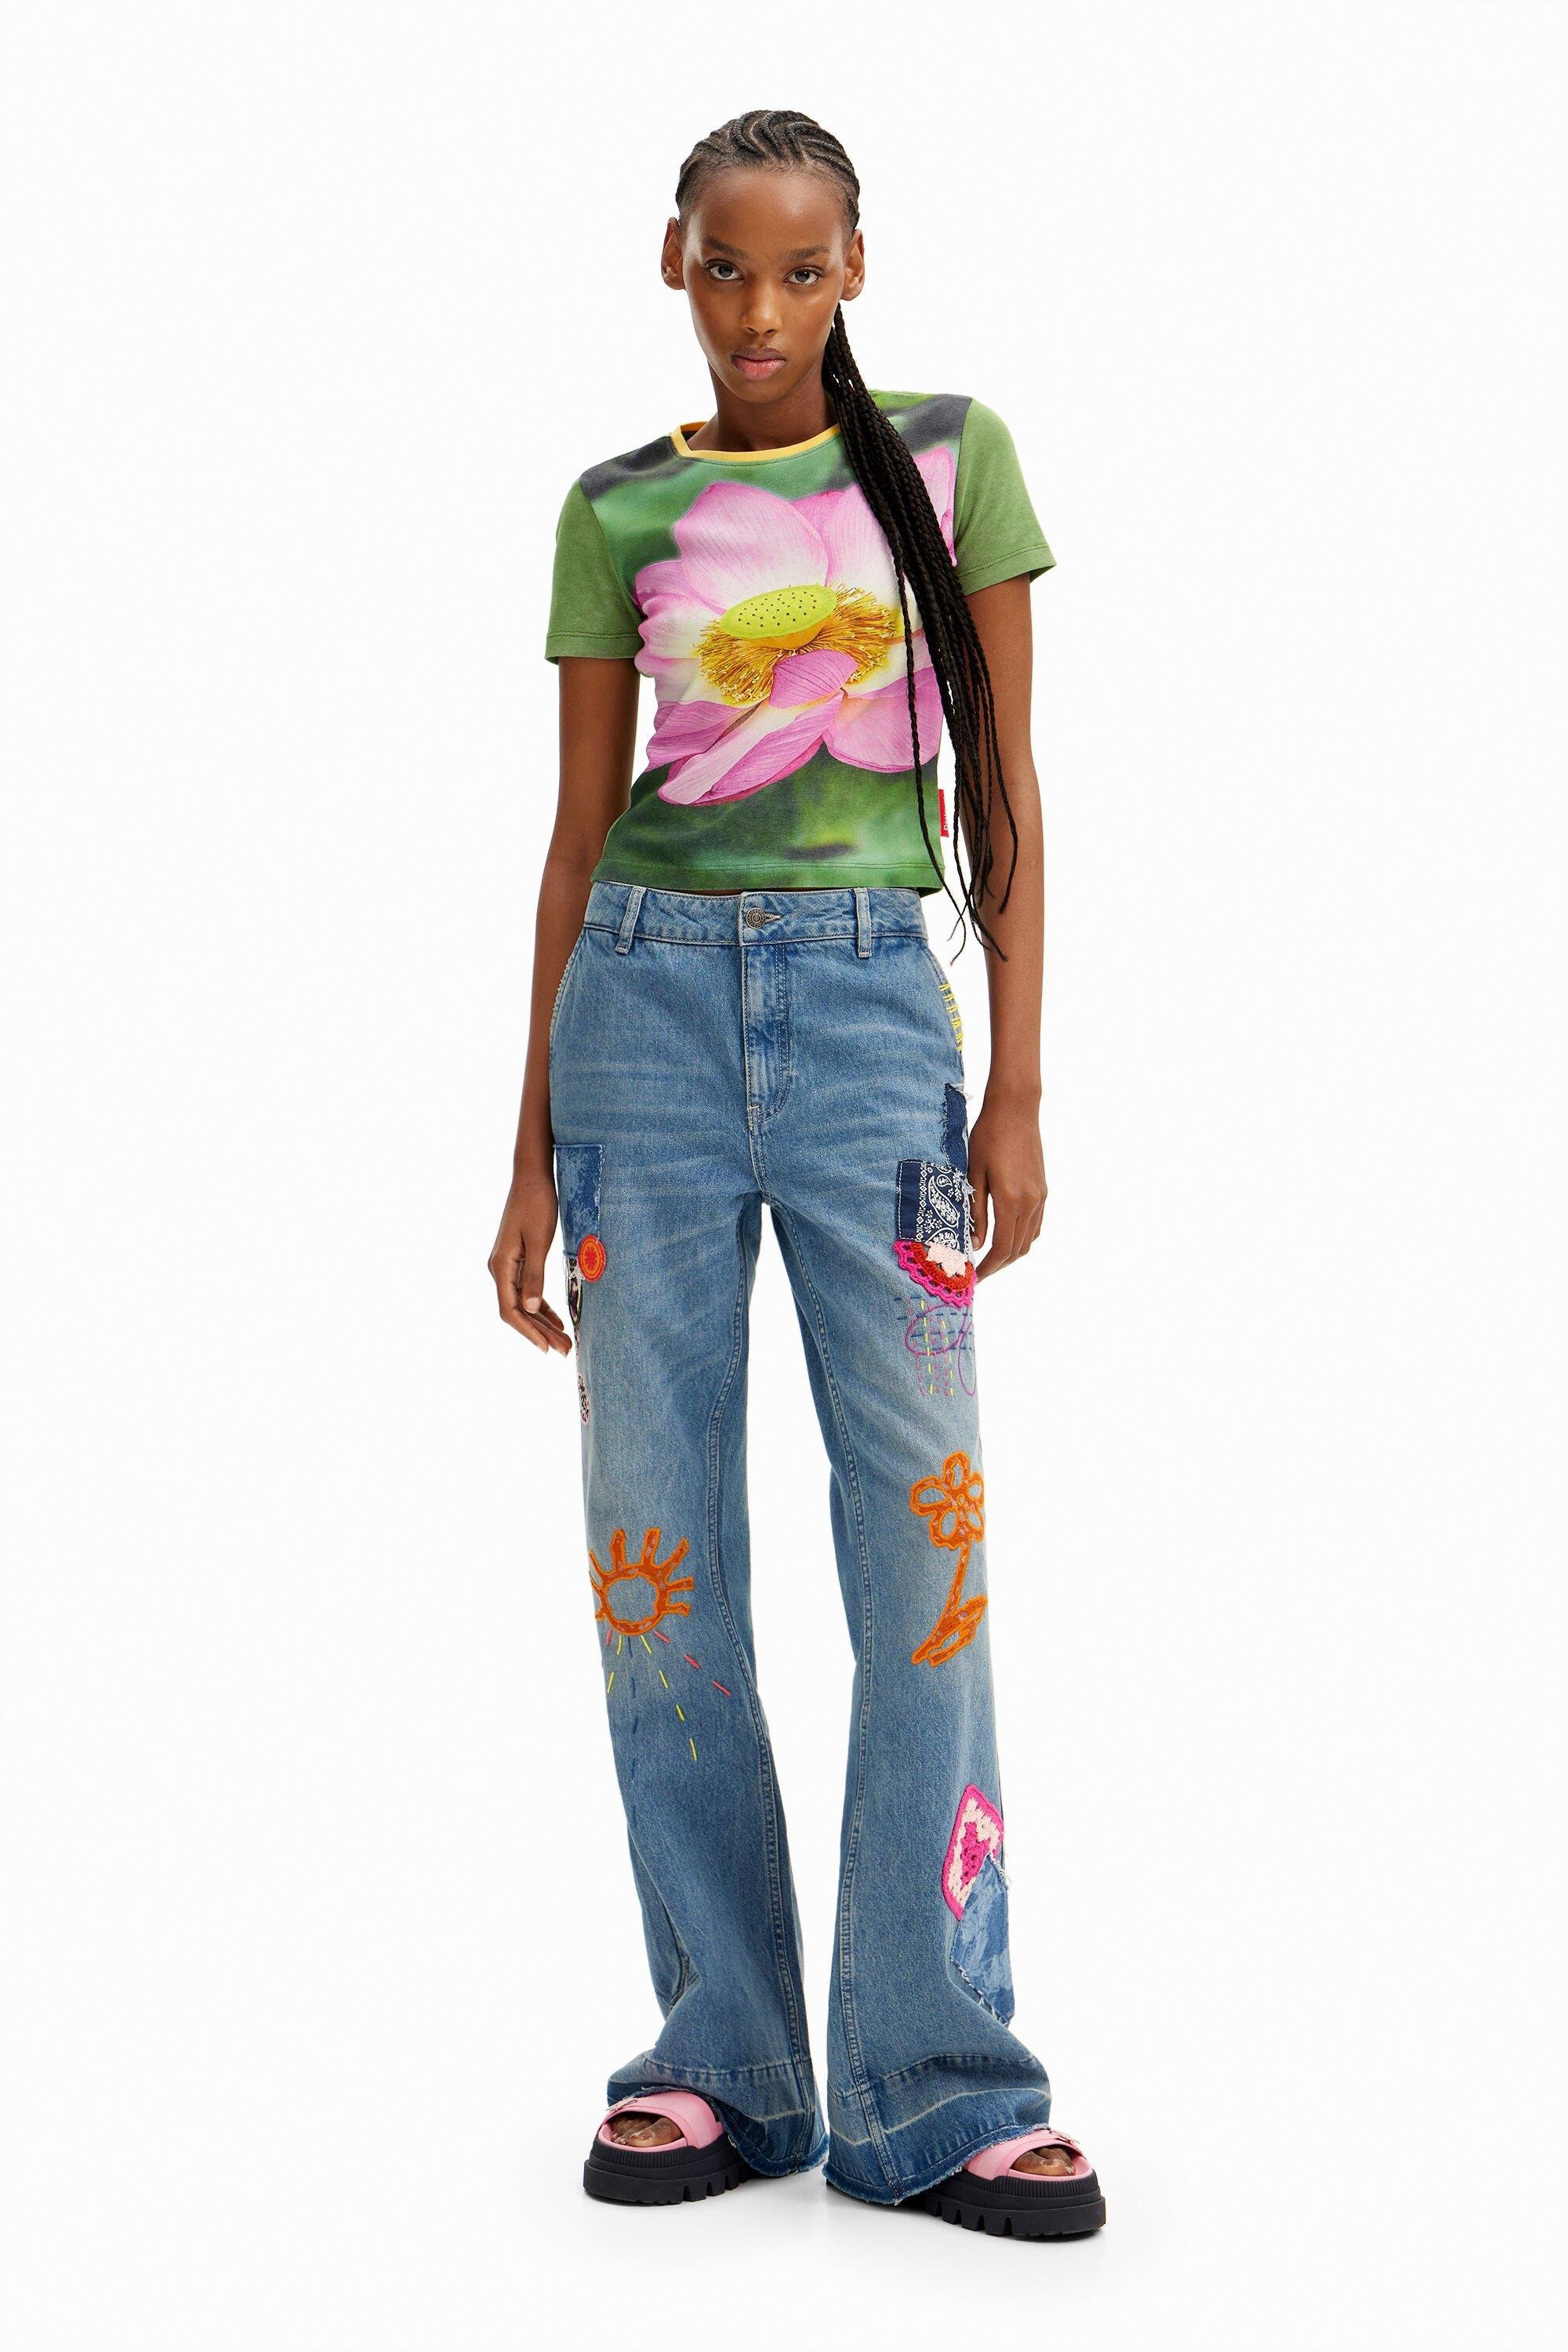 Tyler McGillivary flared jeans by DESIGUAL